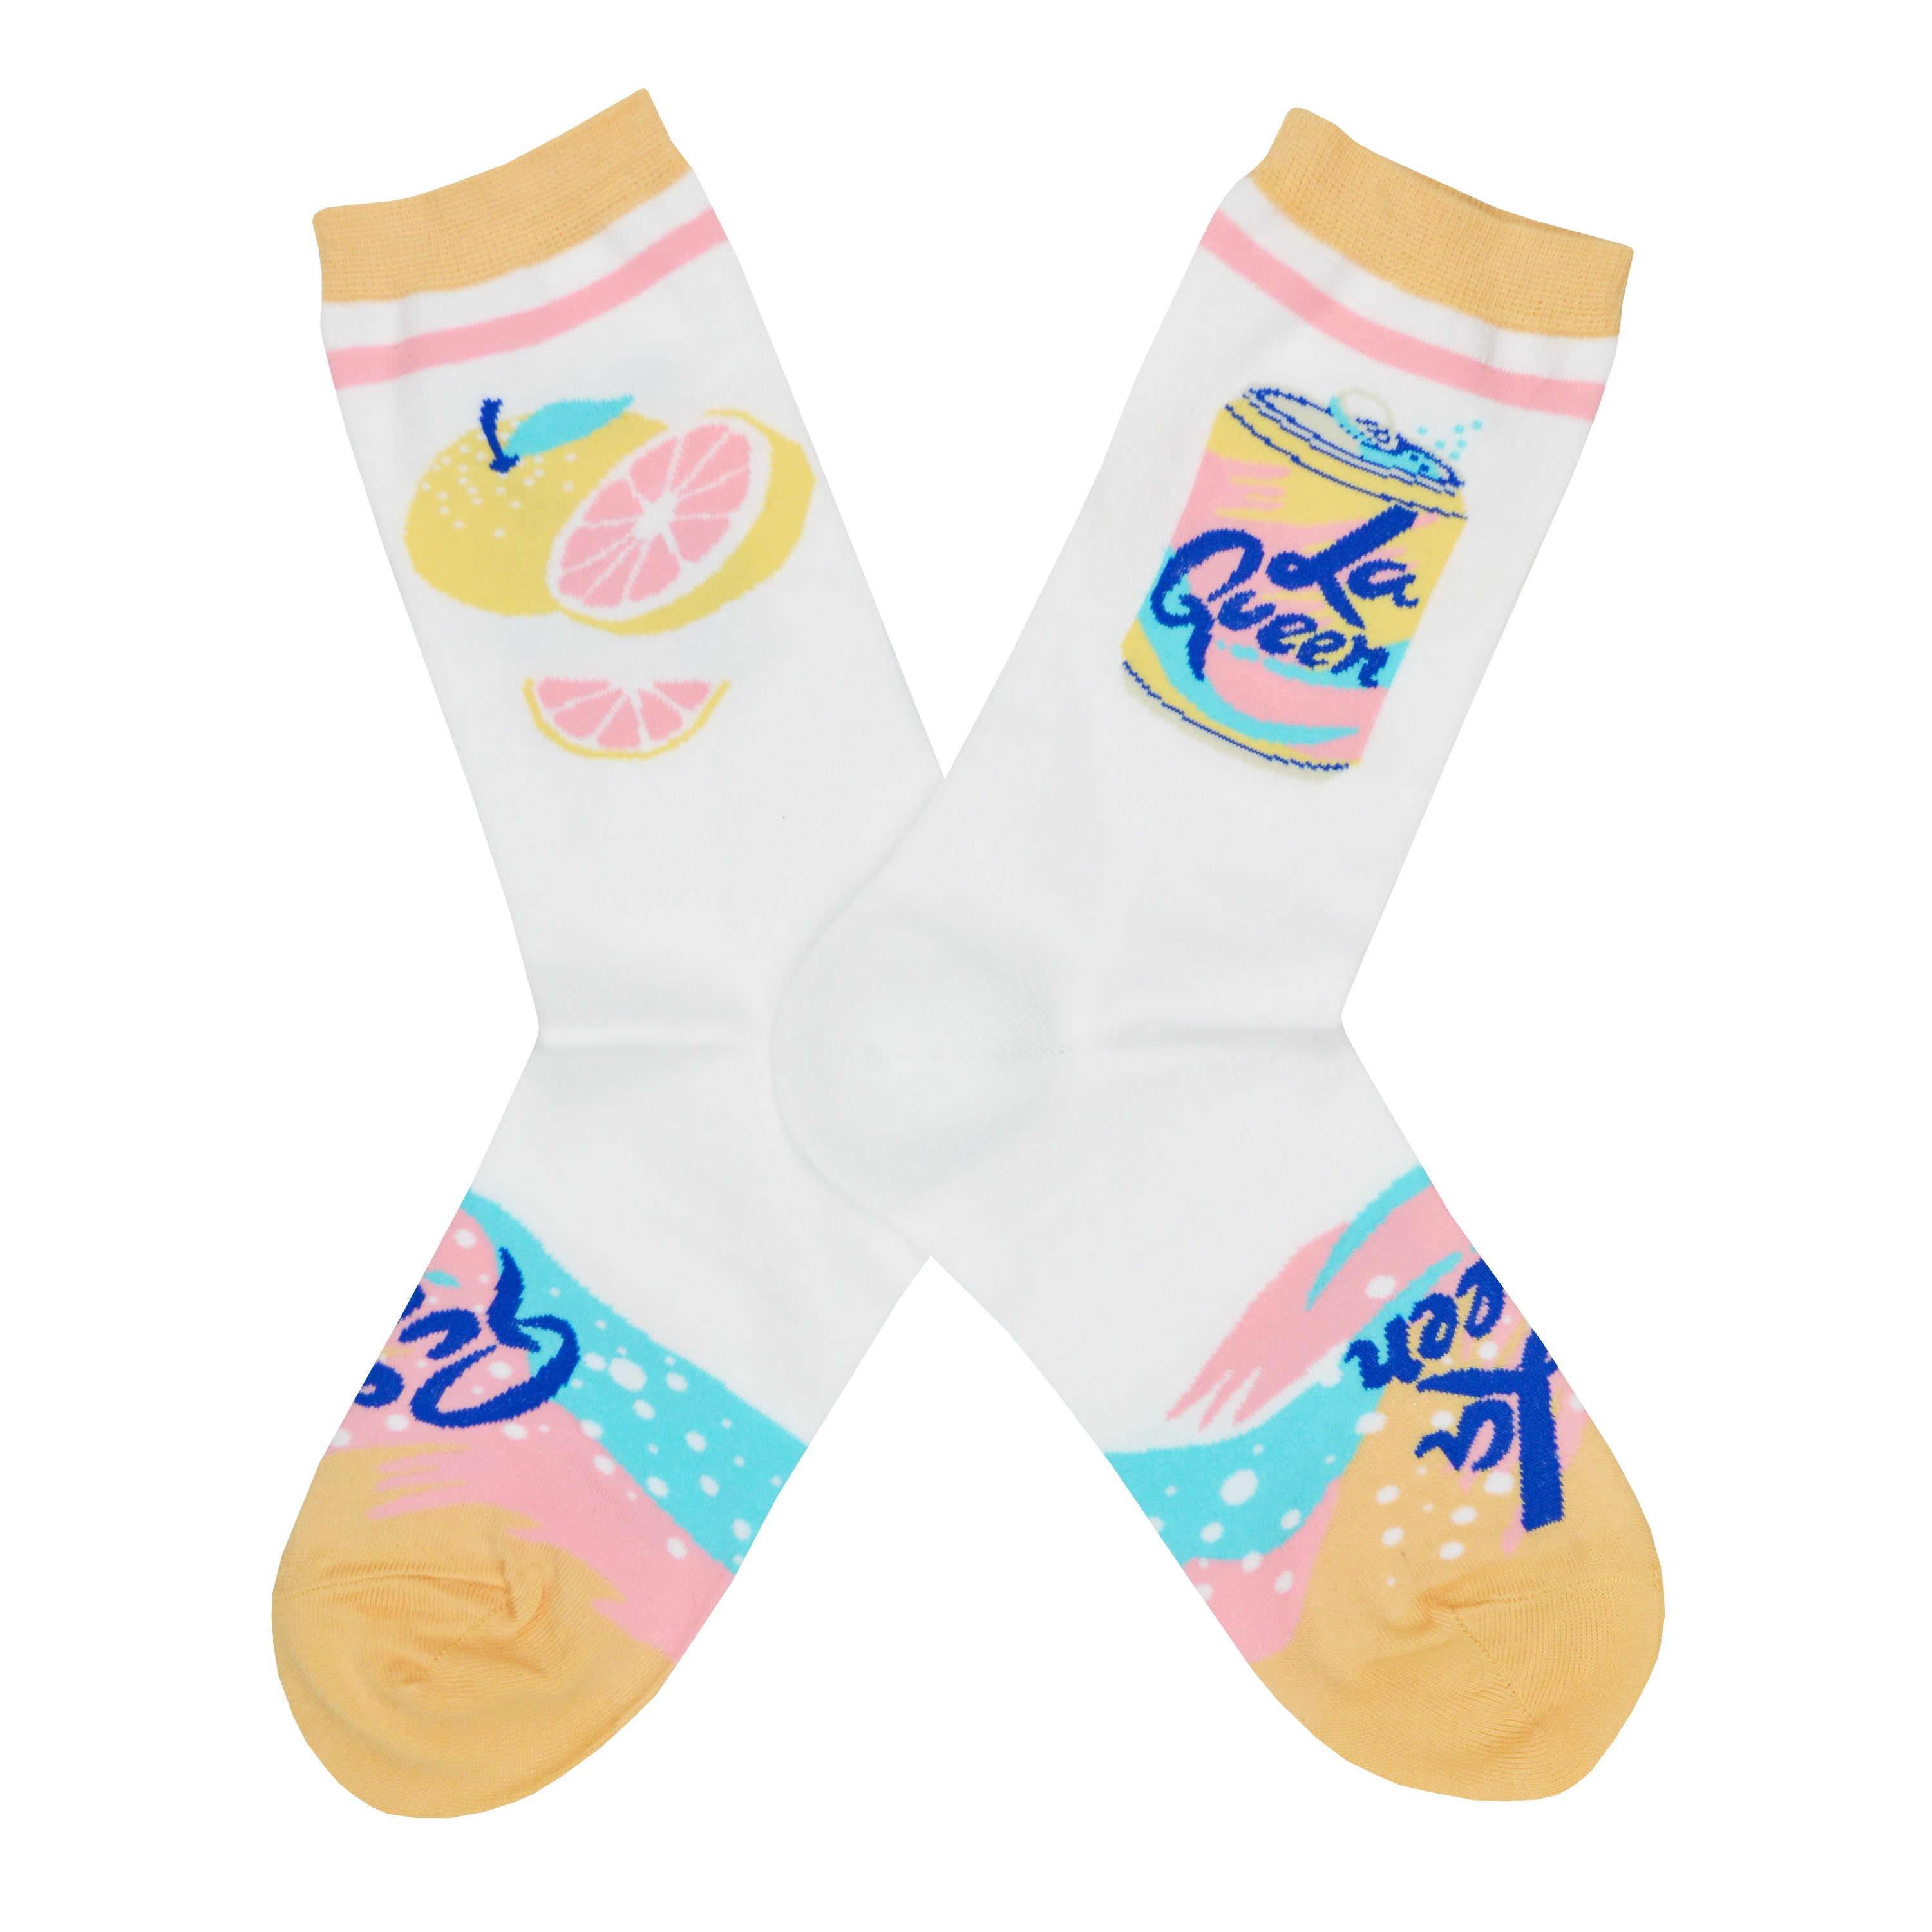 These white cotton cute women's crew socks with a peach toe and cuff by the brand Yellow Owl Workshop feature a can that says 